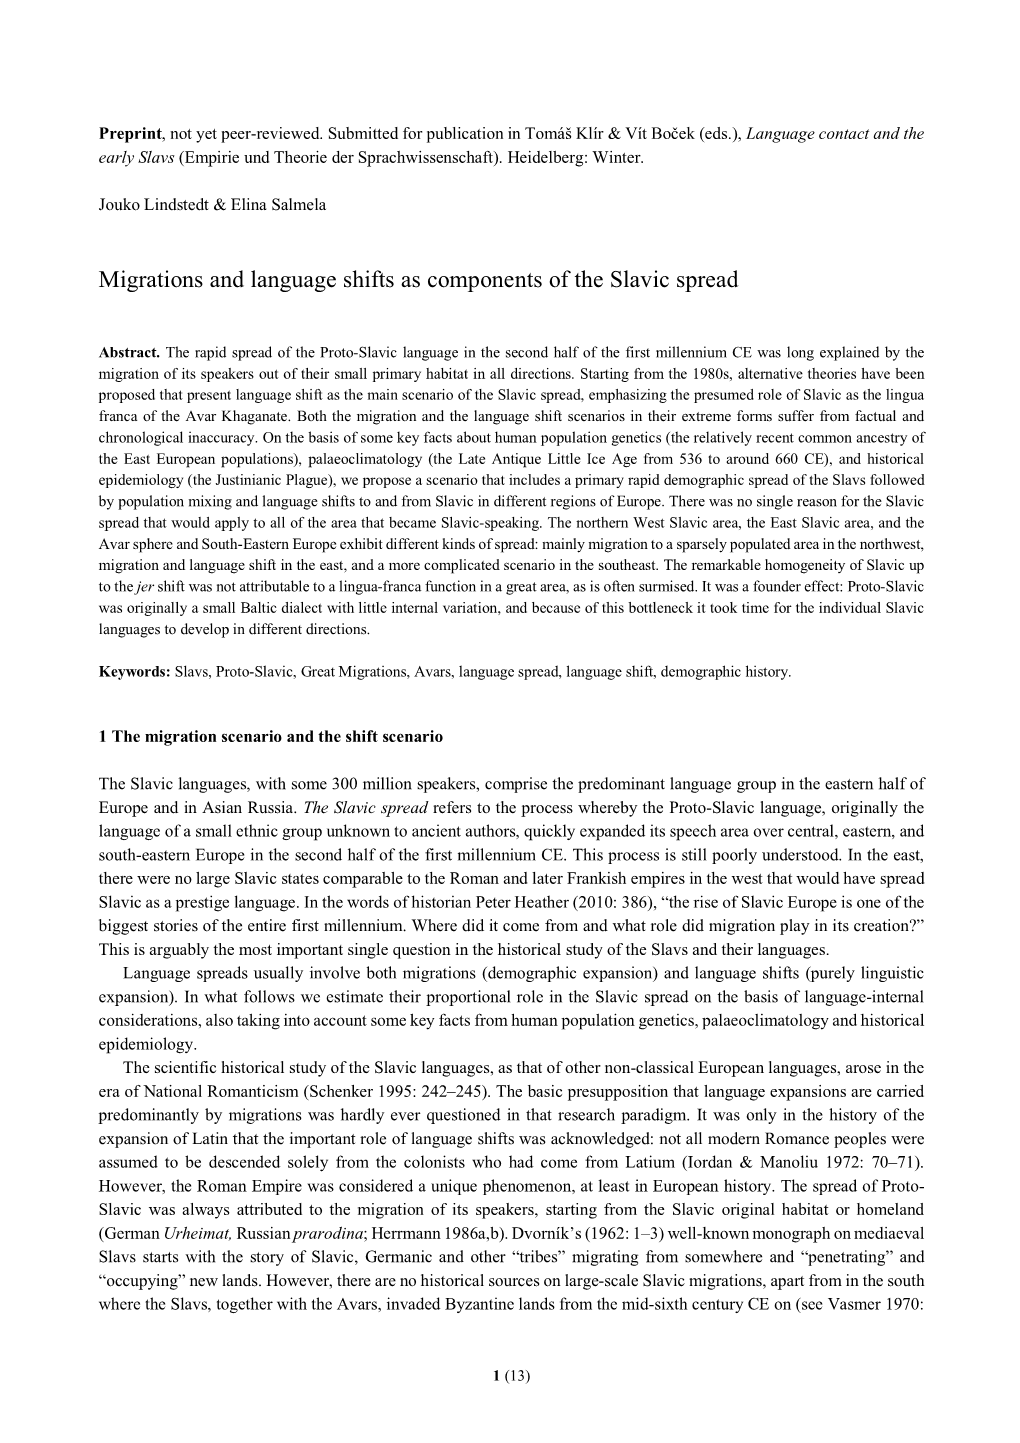 Migrations and Language Shifts As Components of the Slavic Spread